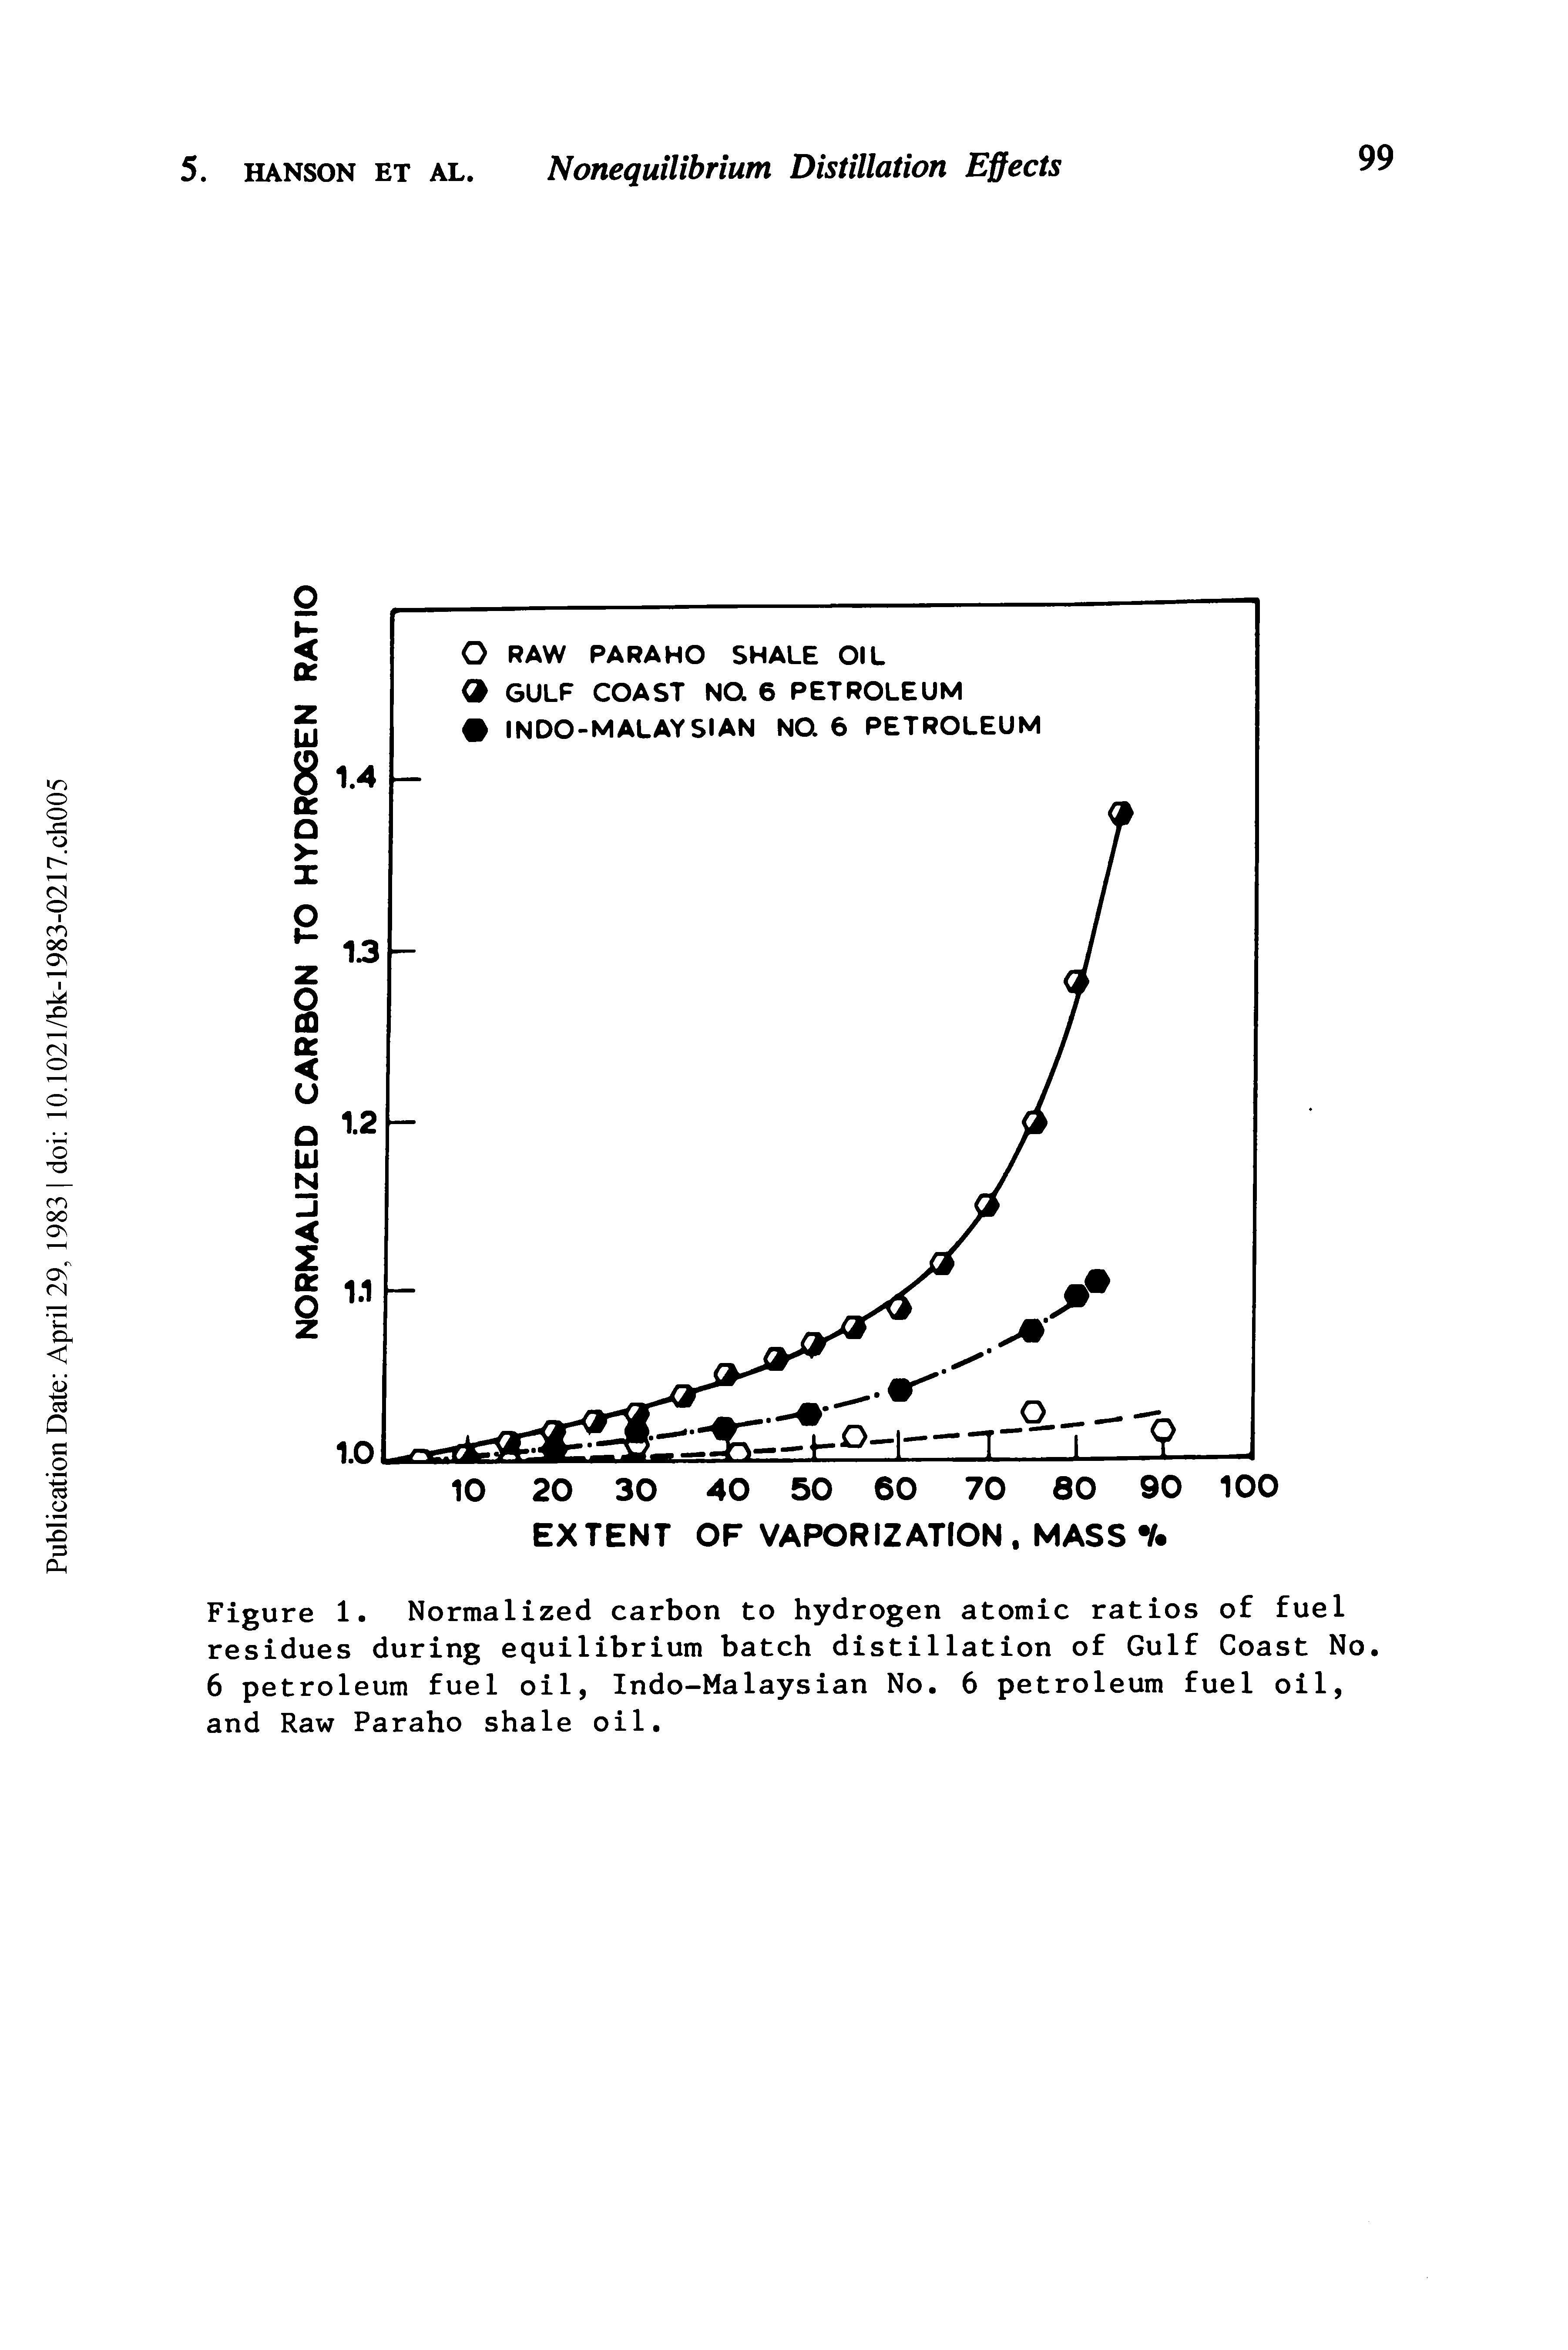 Figure 1. Normalized carbon to hydrogen atomic ratios of fuel residues during equilibrium batch distillation of Gulf Coast No. 6 petroleum fuel oil, Indo-Malaysian No. 6 petroleum fuel oil, and Raw Paraho shale oil.